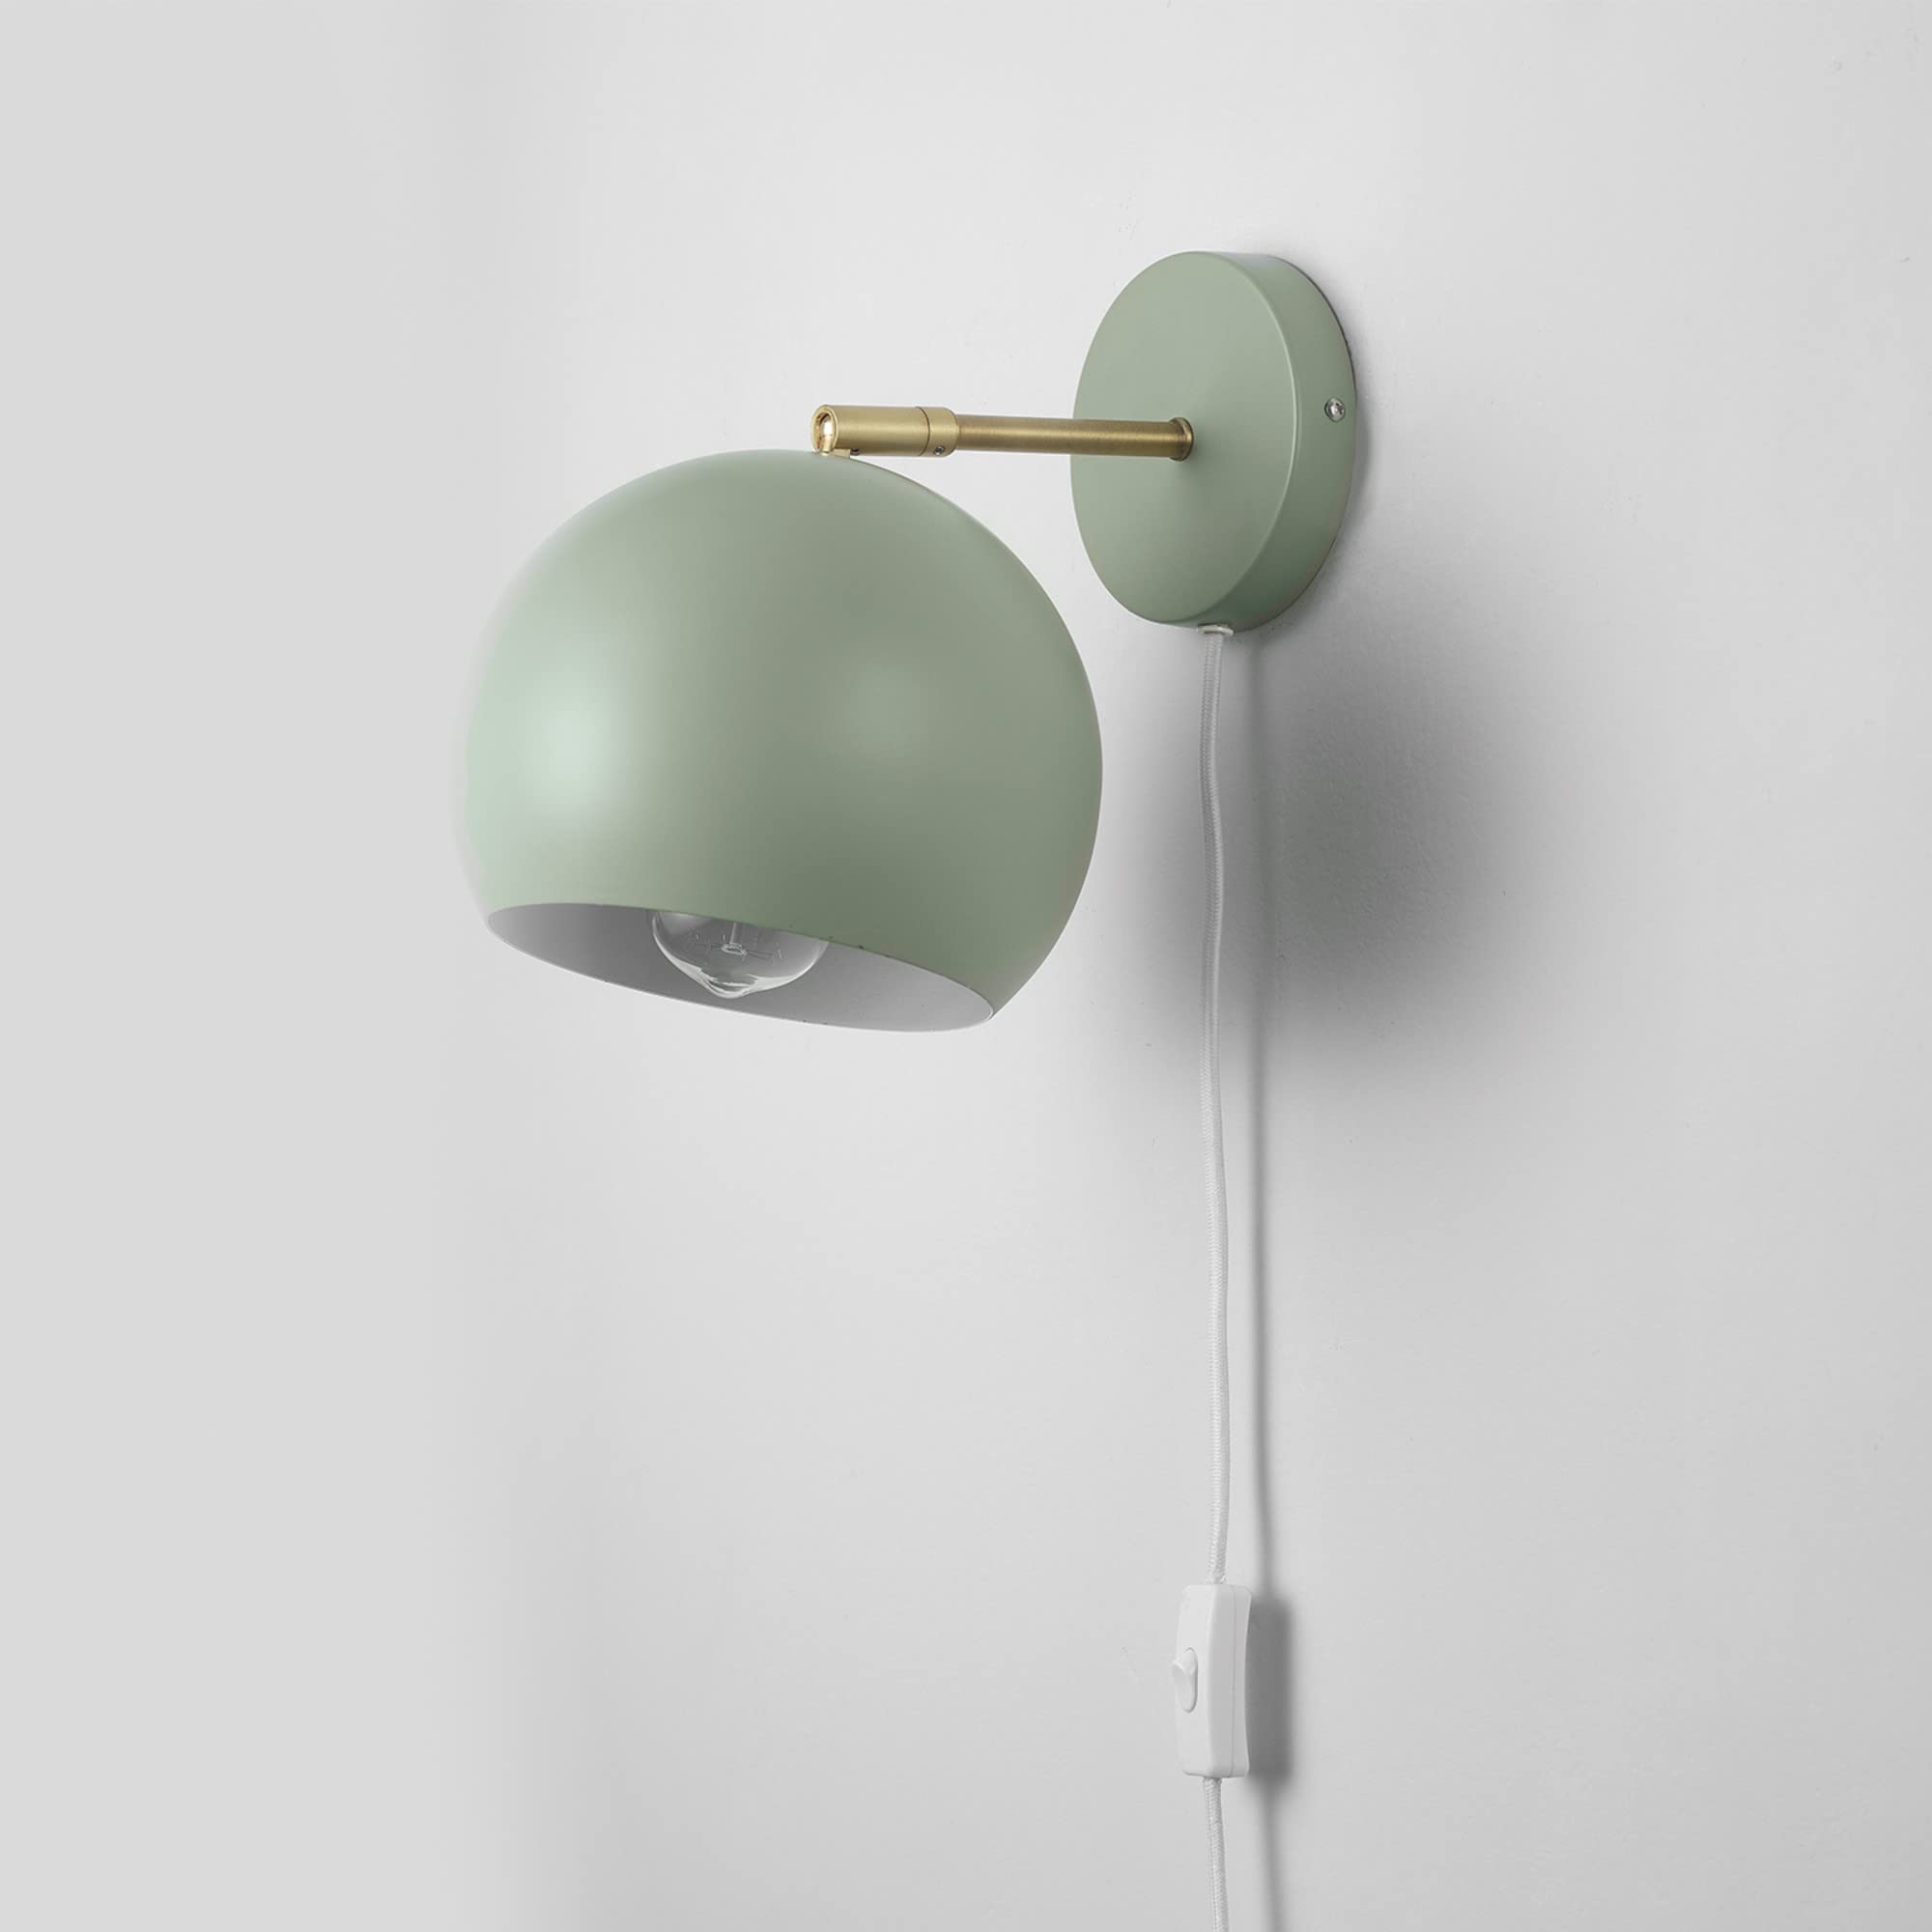 Novogratz x Globe Electric 65866 Willow 1-Light Plug-in or Hardwire Wall Sconce, Sage Green, Matte Brass Accent, Bulb Not Included